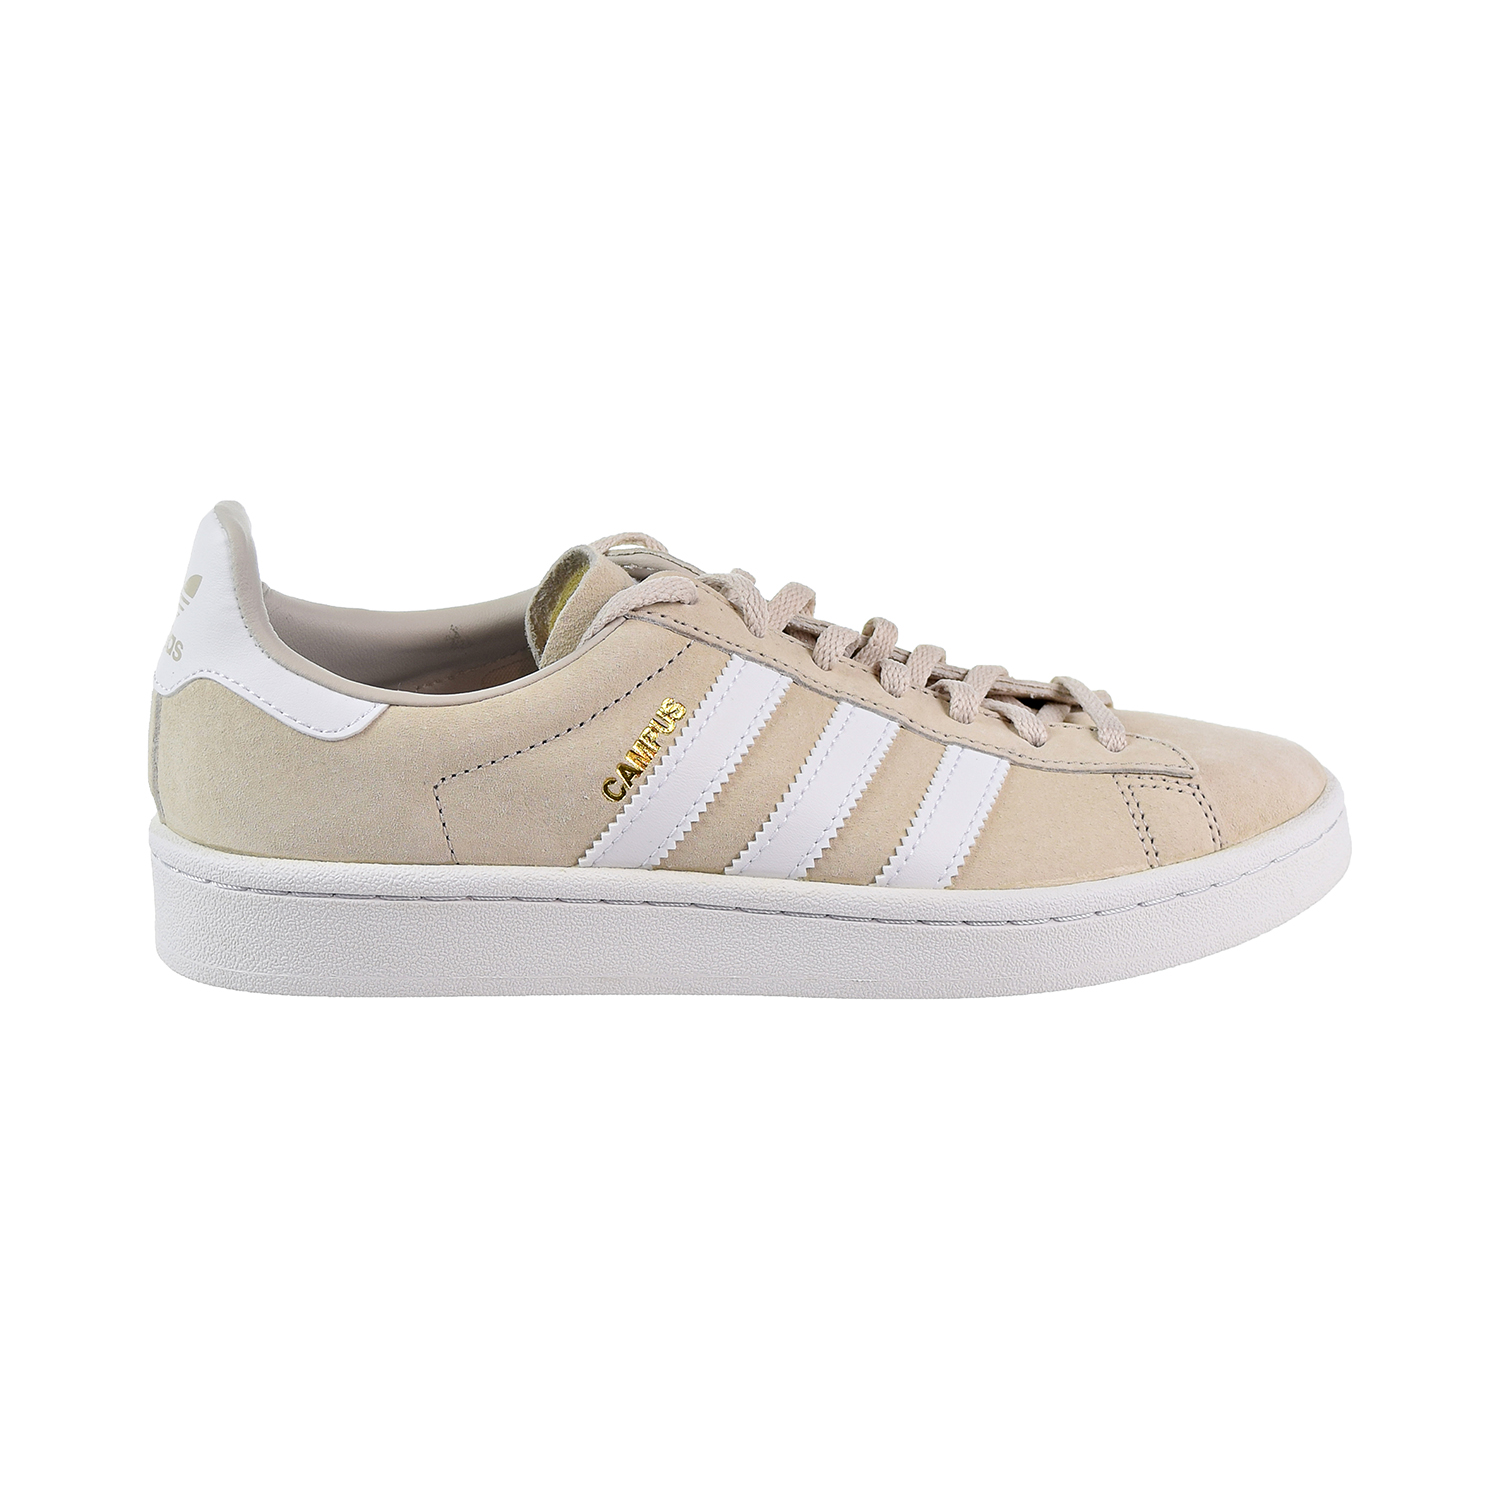 Adidas Campus Women's Shoes Core Brown-Footwear White-Crystal White BY9846  | eBay